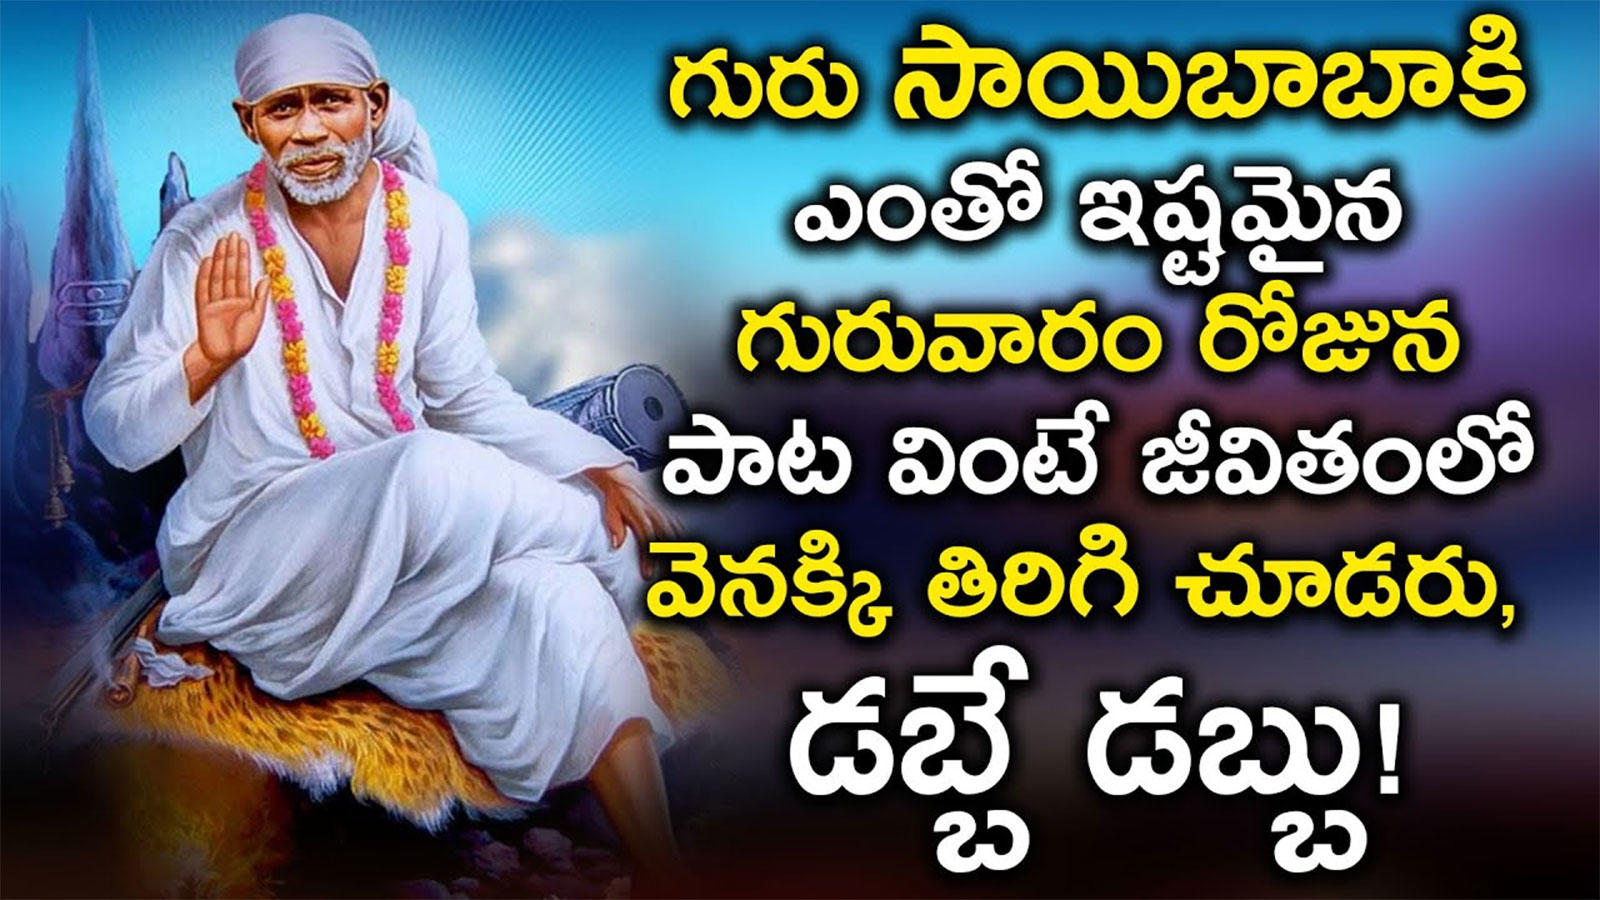 Listen To Latest Devotional Telugu Audio Song Jukebox Of 'Lord ...